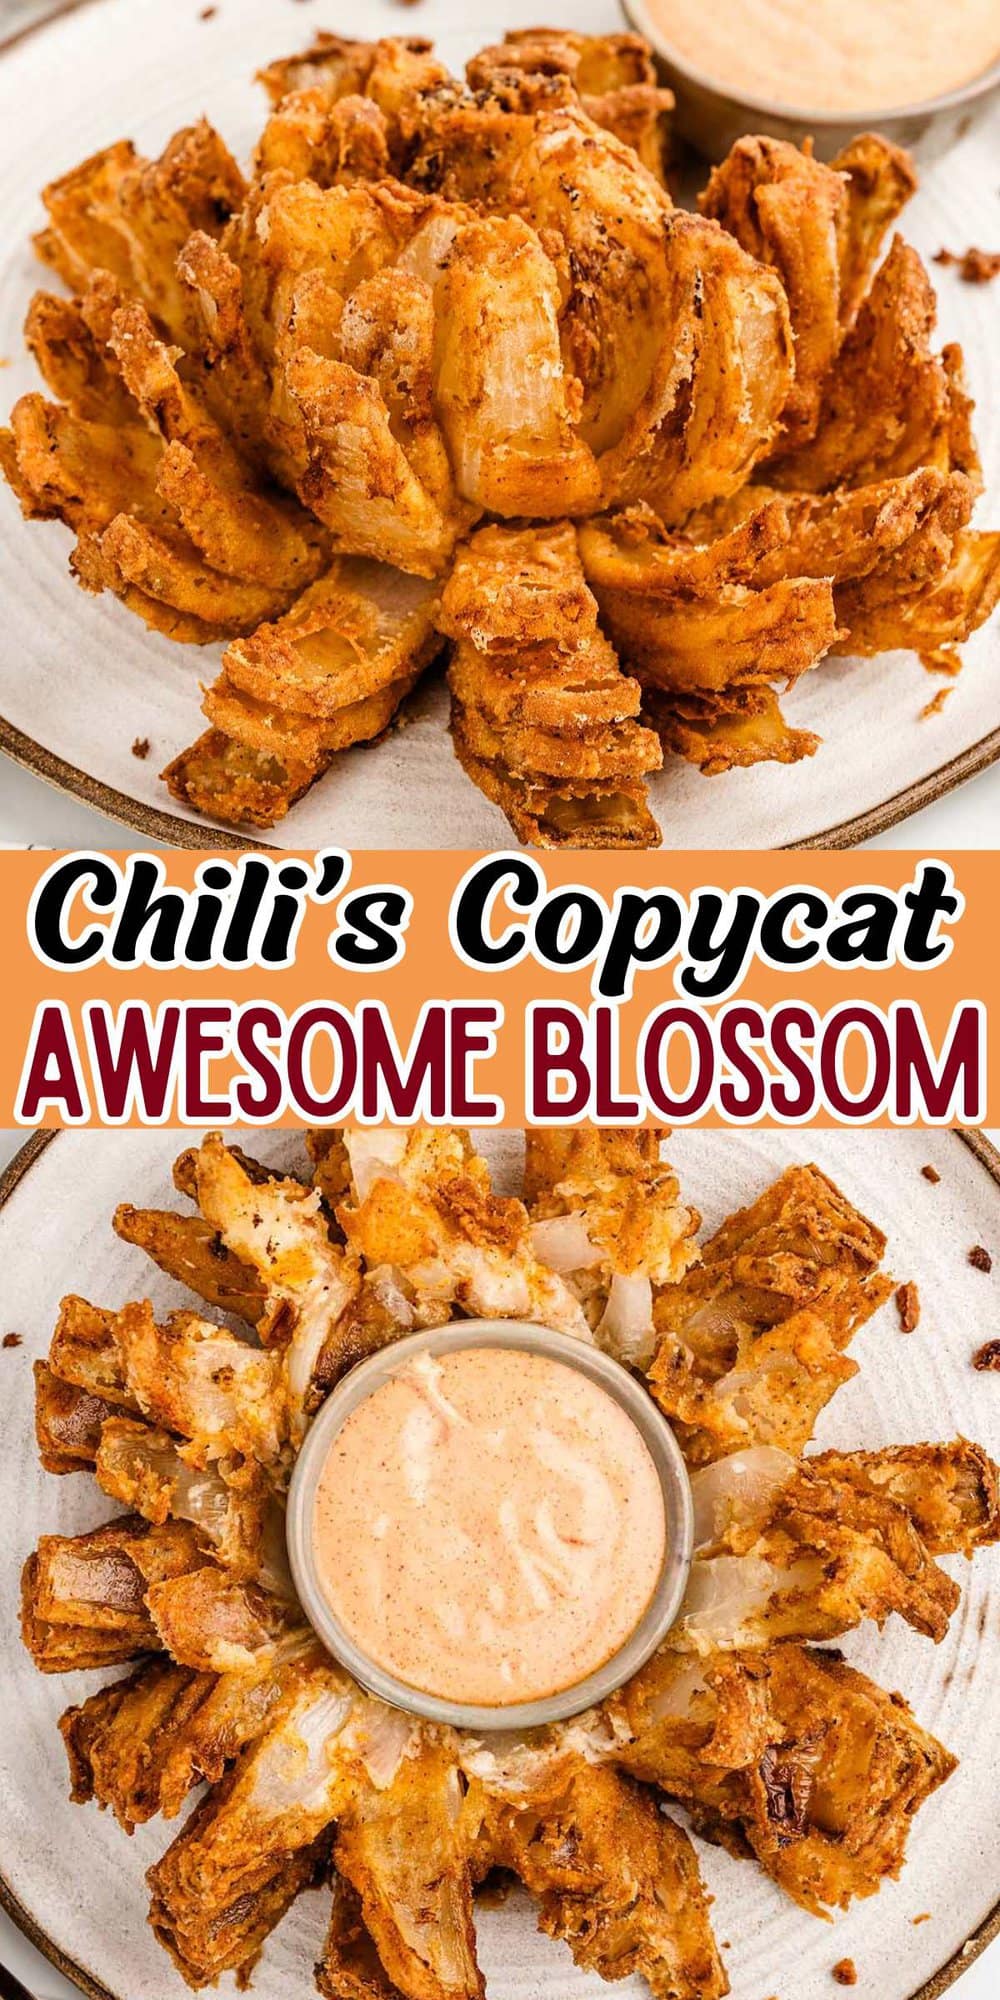 Chili’s Awesome Blossom pinterest